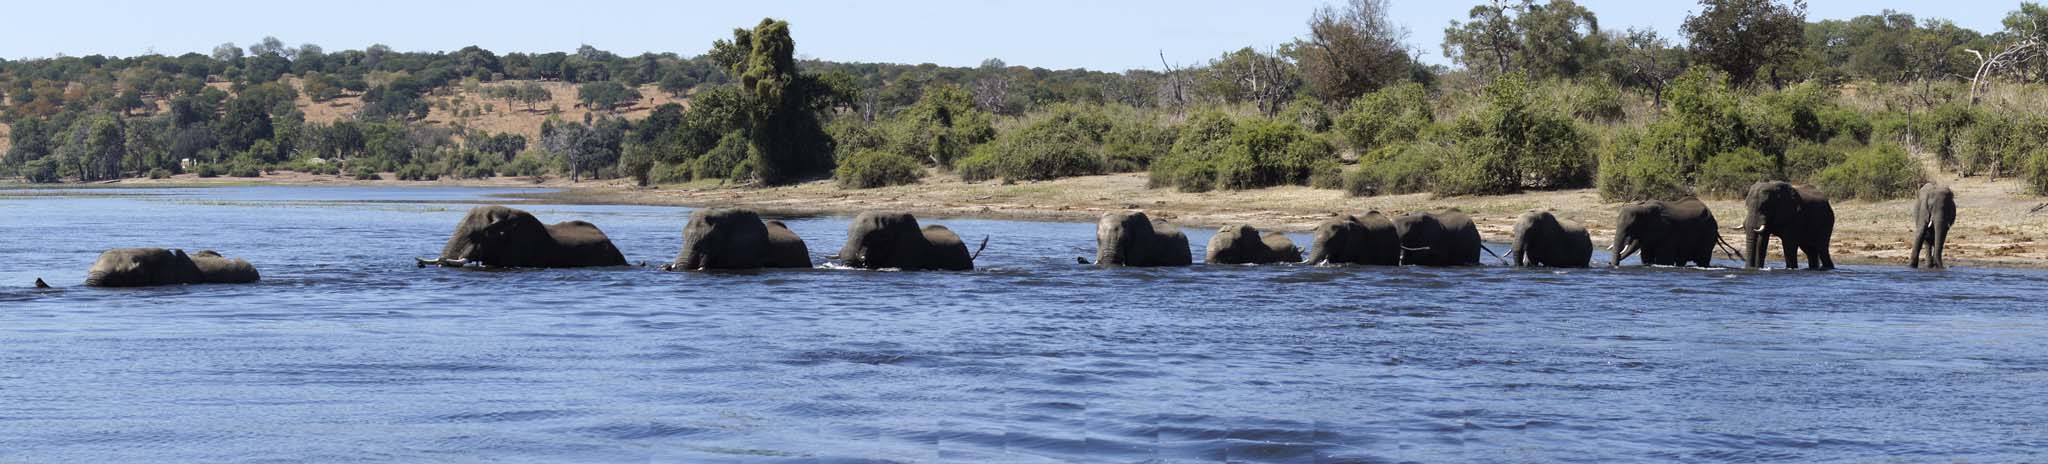 elephants in water panorama